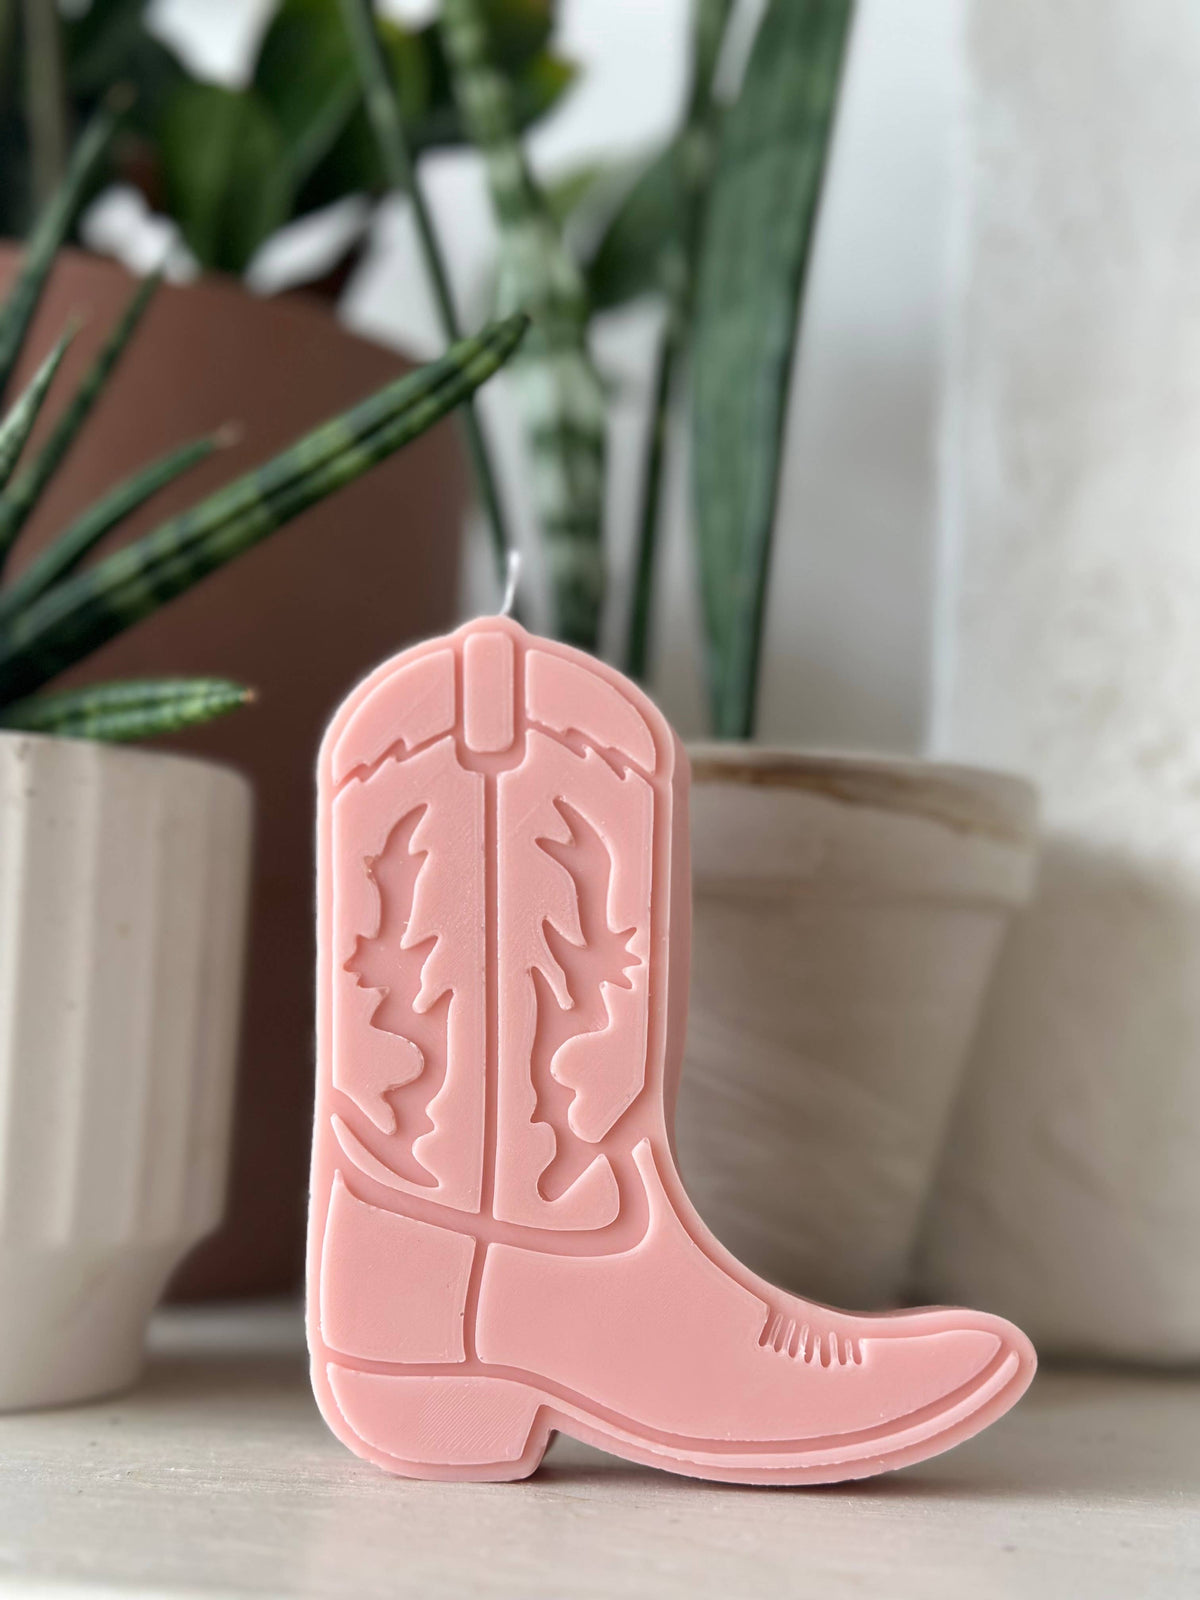 Cowboy Boot Candle - Dusty rose